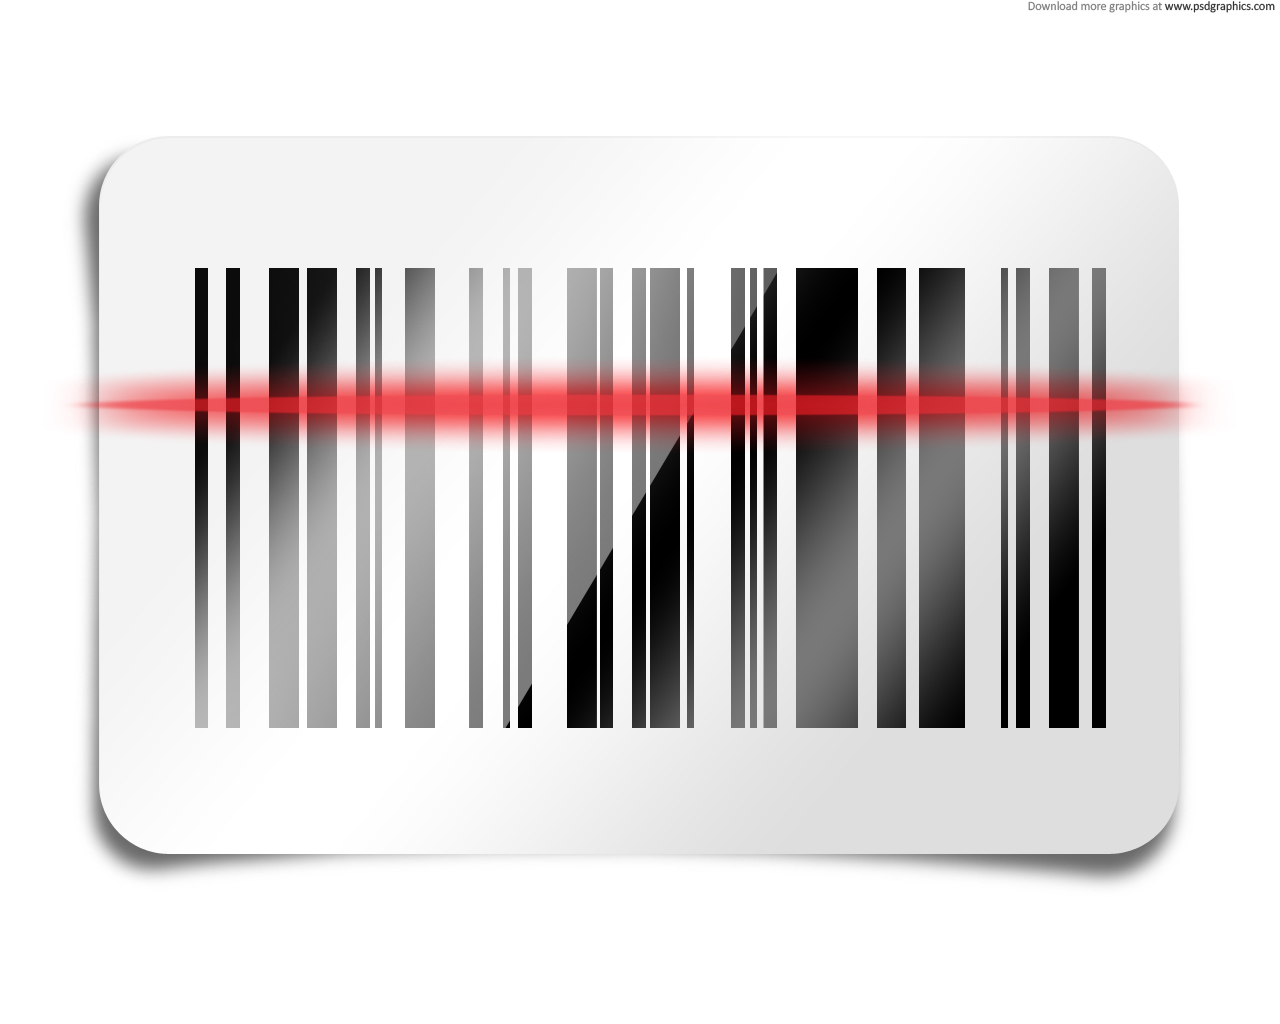 Barcode Wallpapers